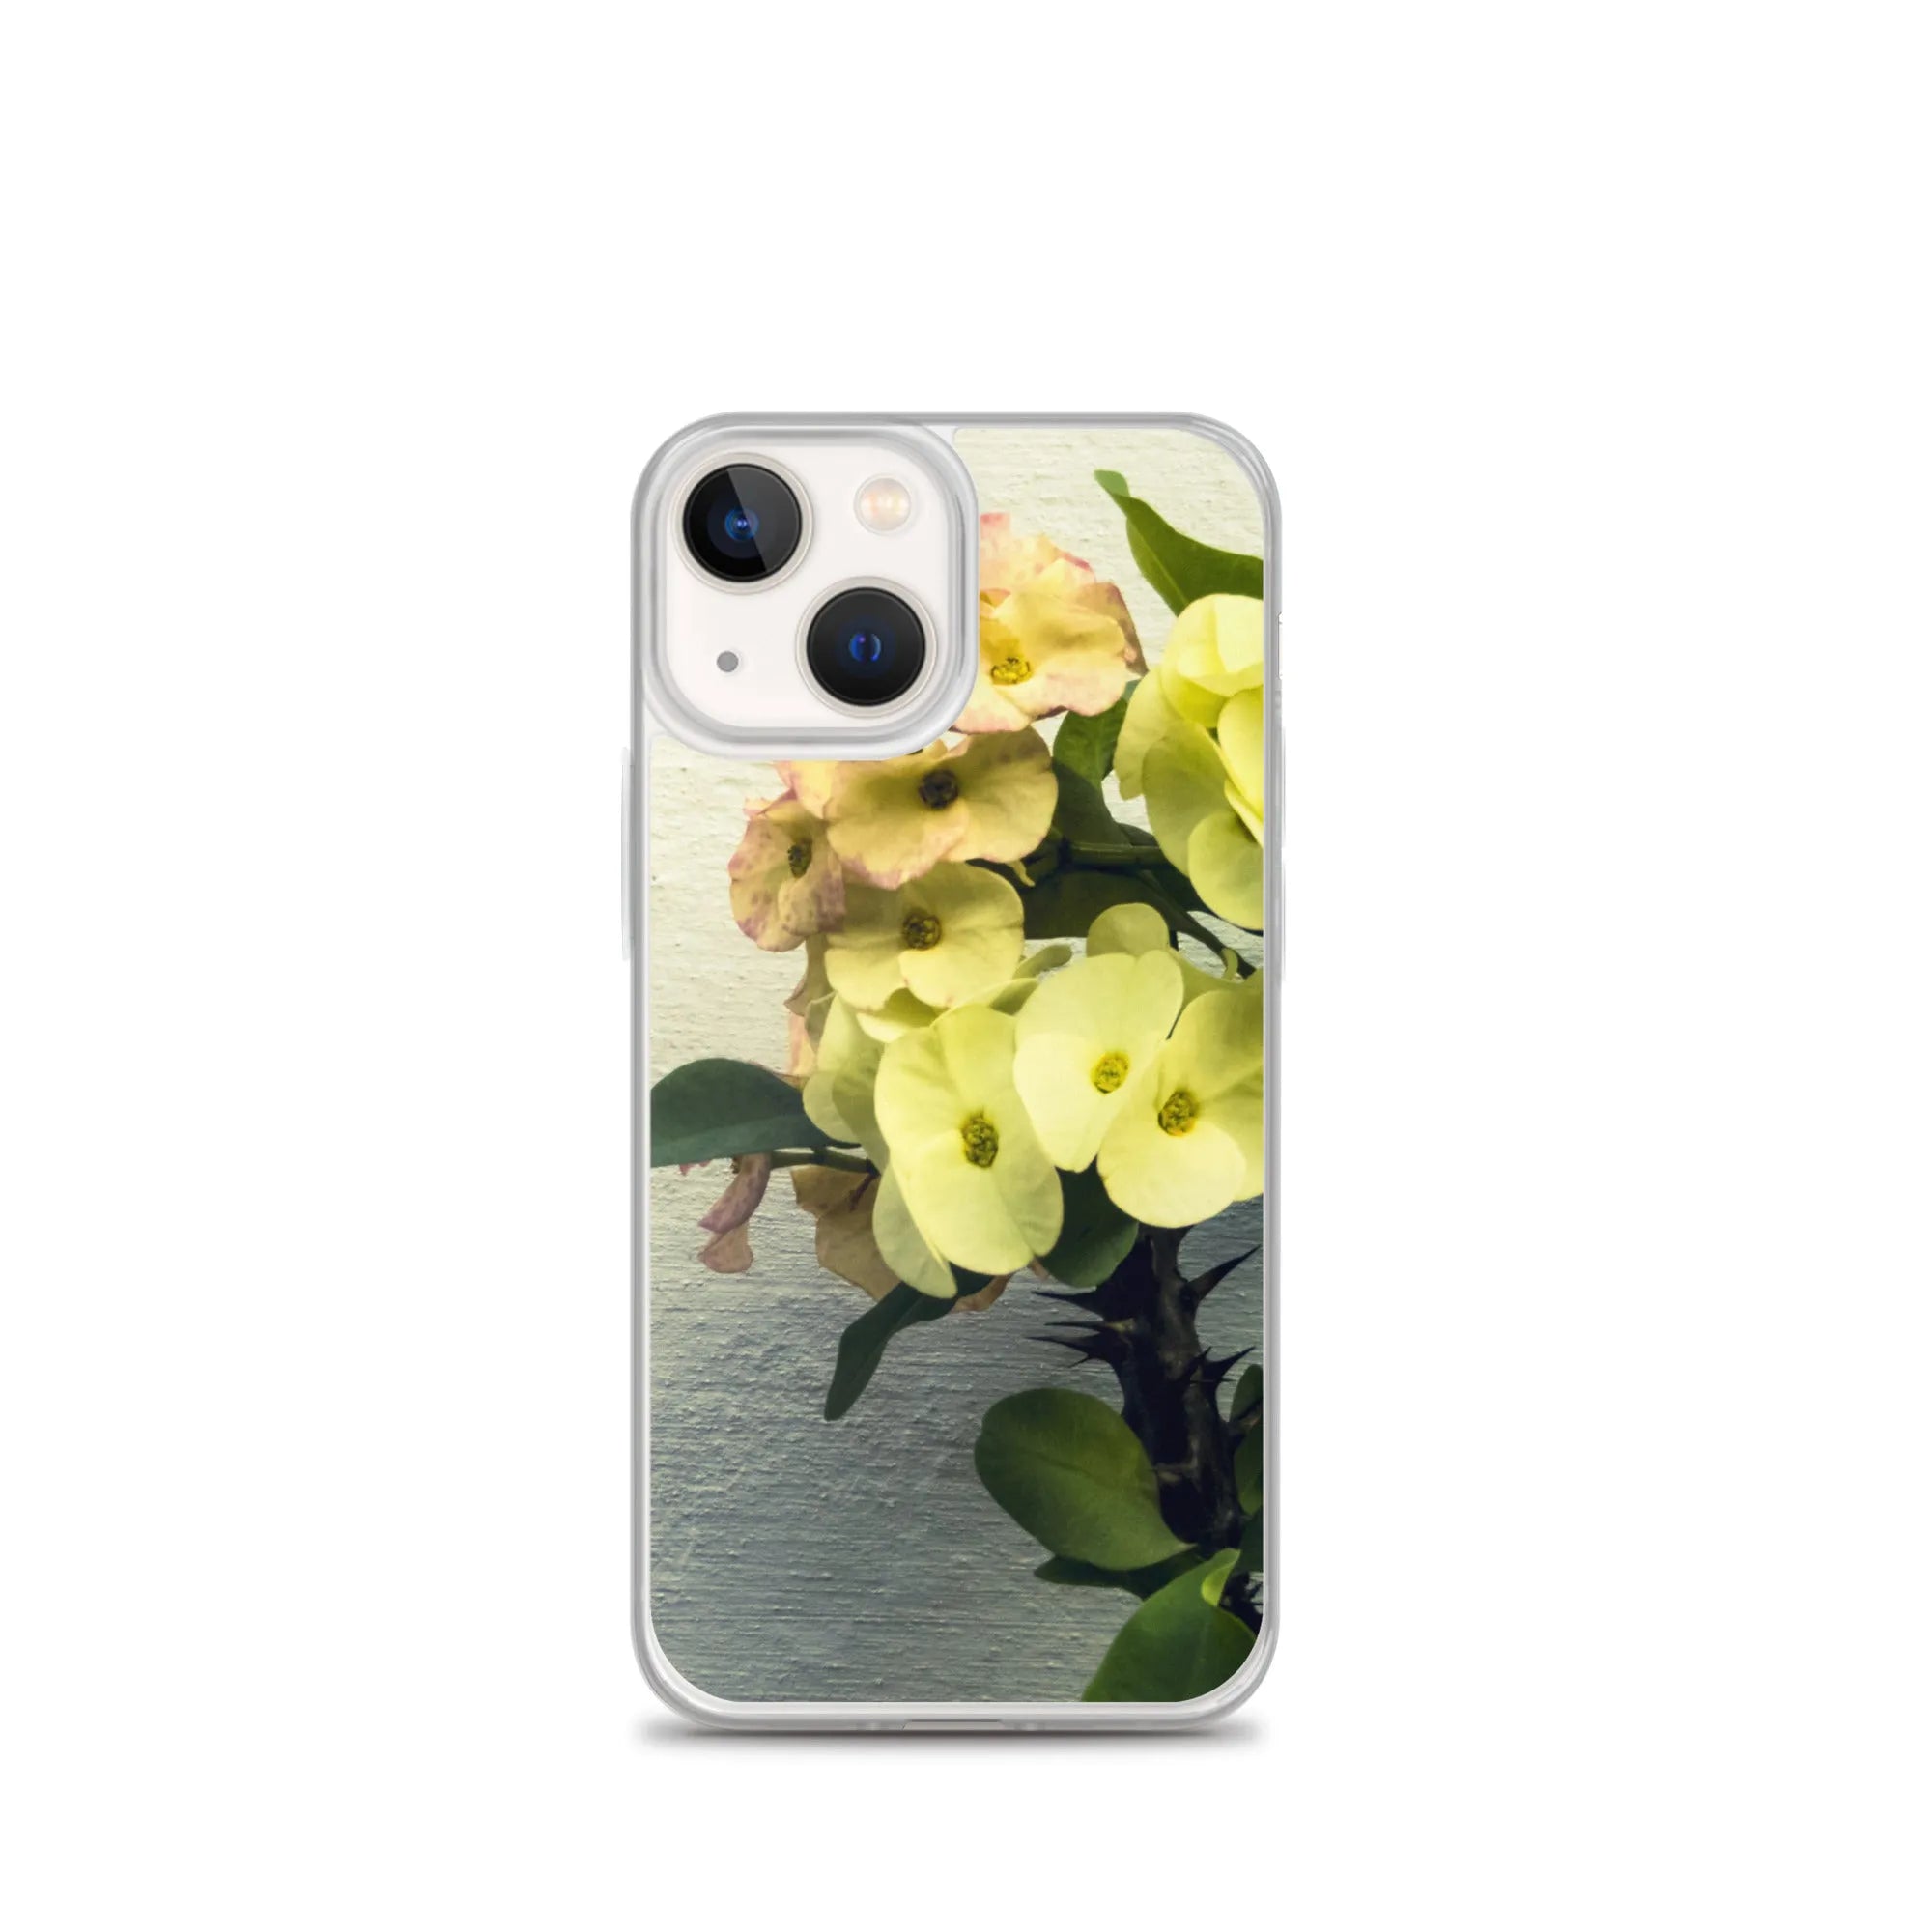 Wallflower Floral Iphone Case - Iphone 13 Mini - Mobile Phone Cases - Aesthetic Art